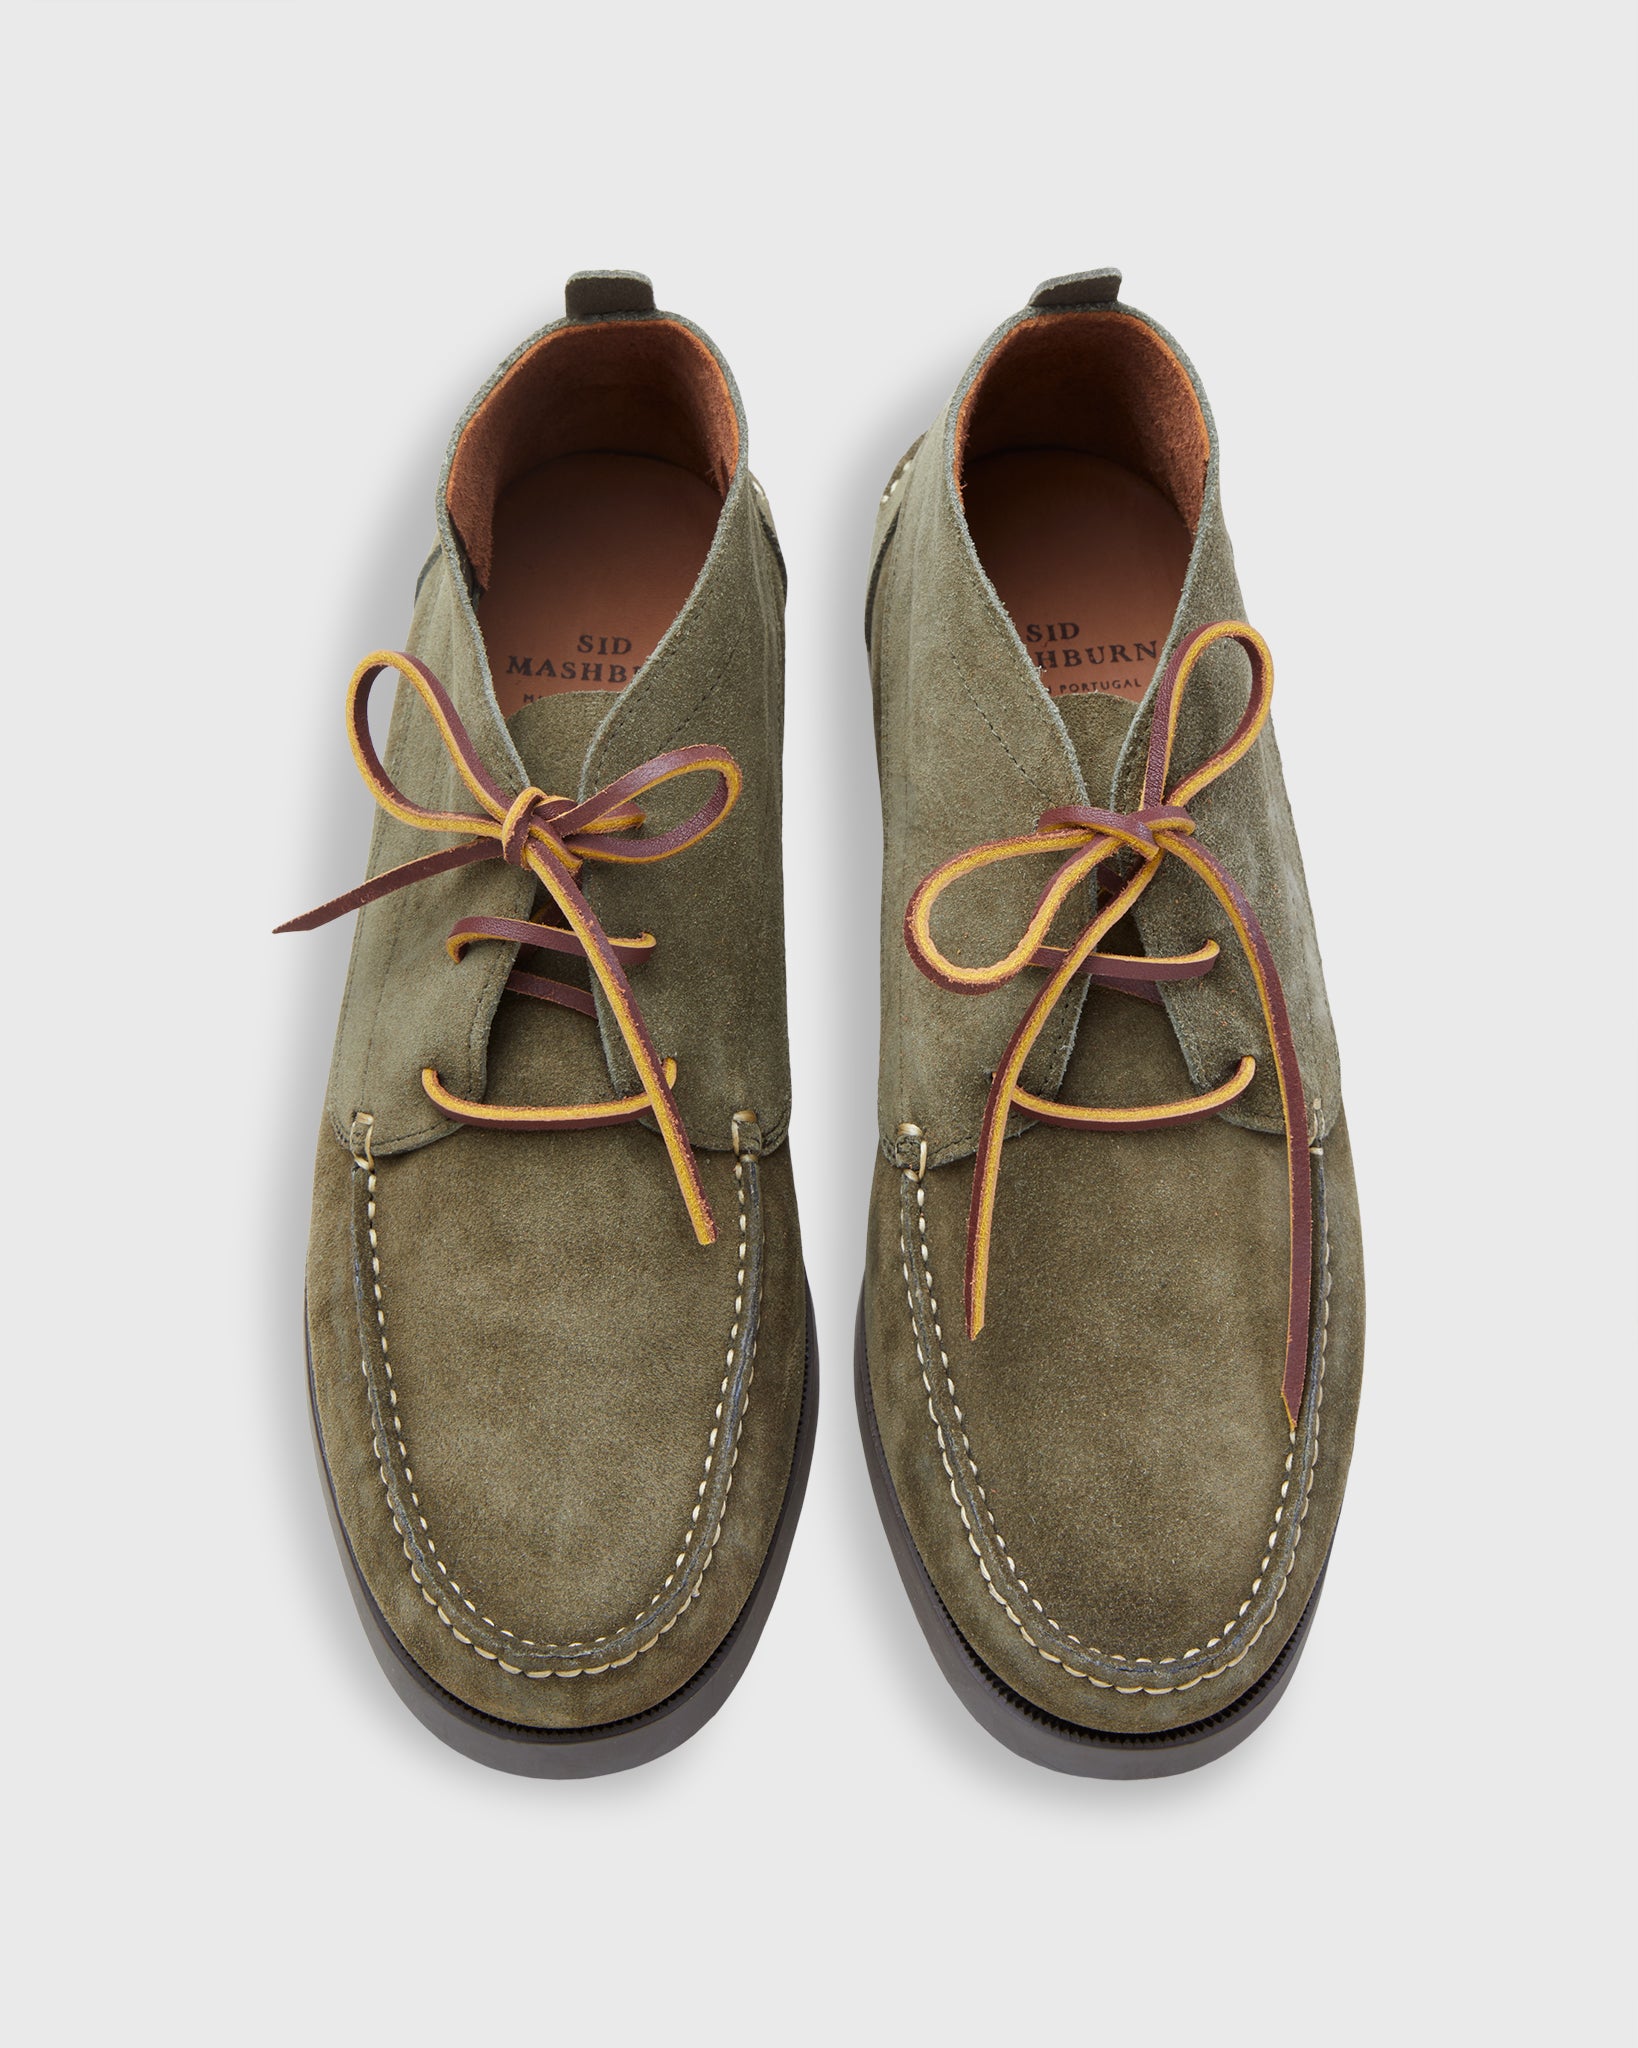 Chukka Camp Moccasin in Olive Suede